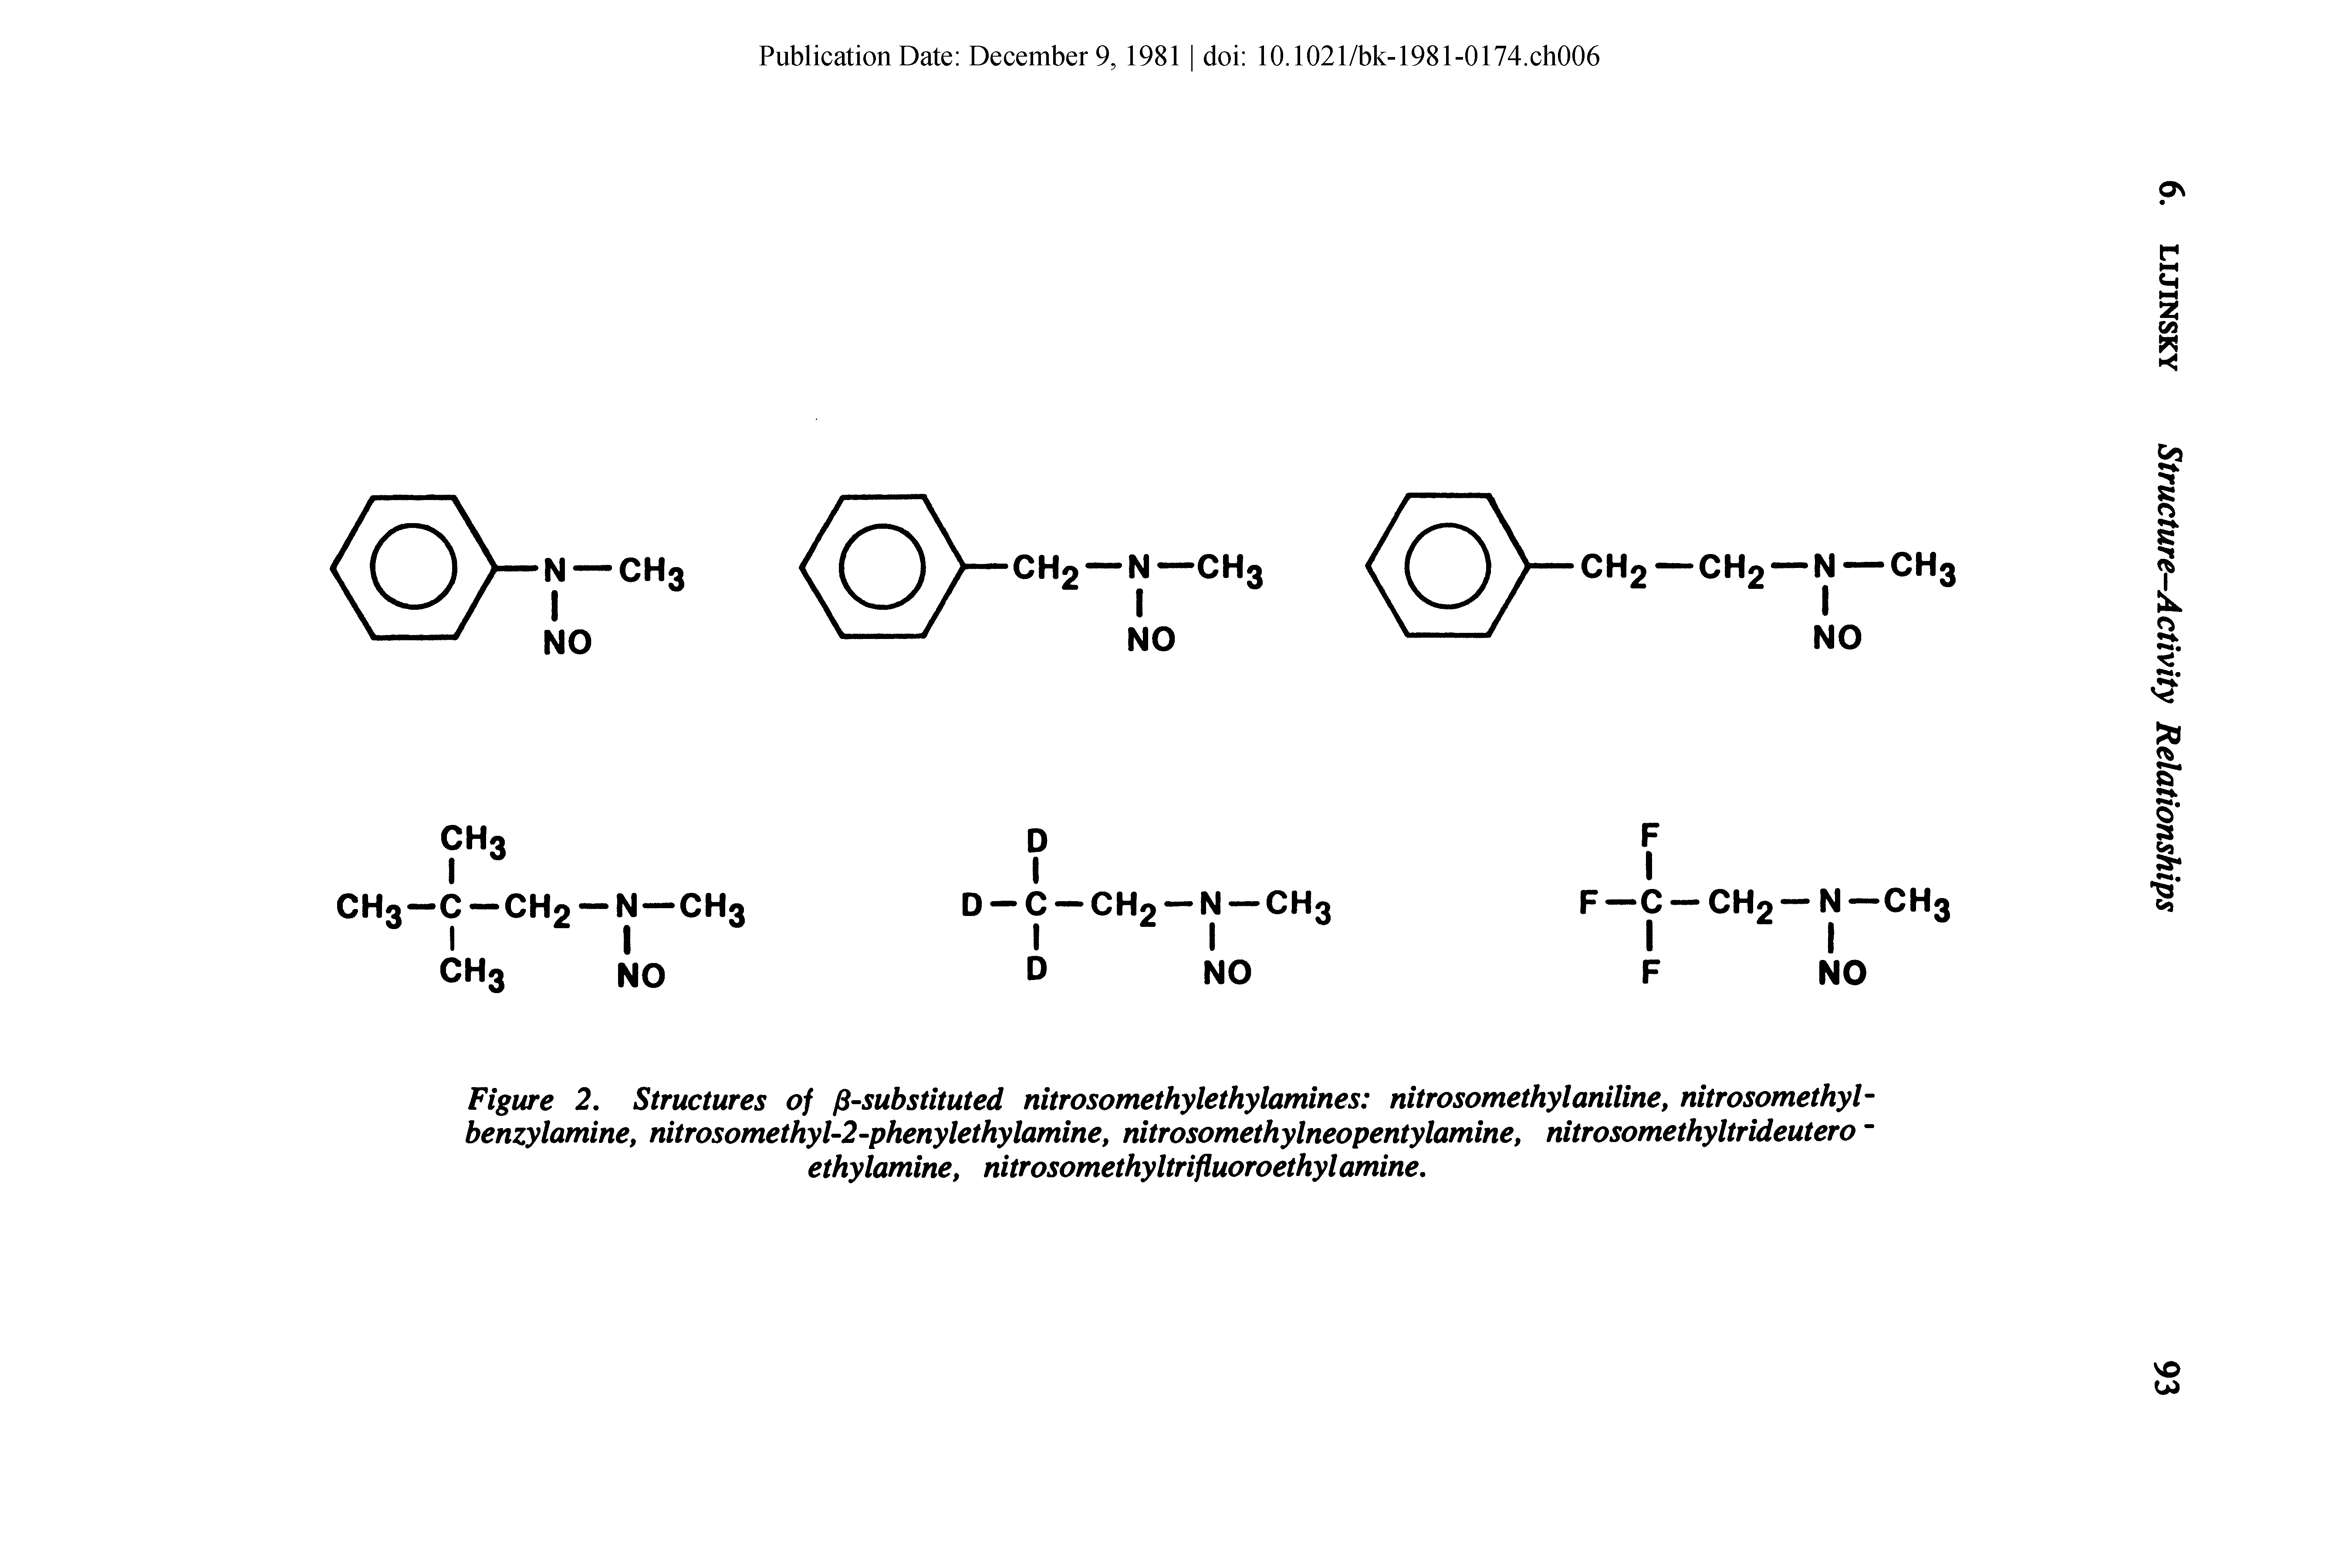 Figure 2, Structures of -substituted nitrosomethylethylamines nitrosomethylaniline, nitrosomethyl-benzylamine, nitrosomethyl-2-phenylethylamine, nitrosomethylneopentylamine, nitrosomethyltrideutero ethylamine, nitrosomethyltrifluoroethyl amine.